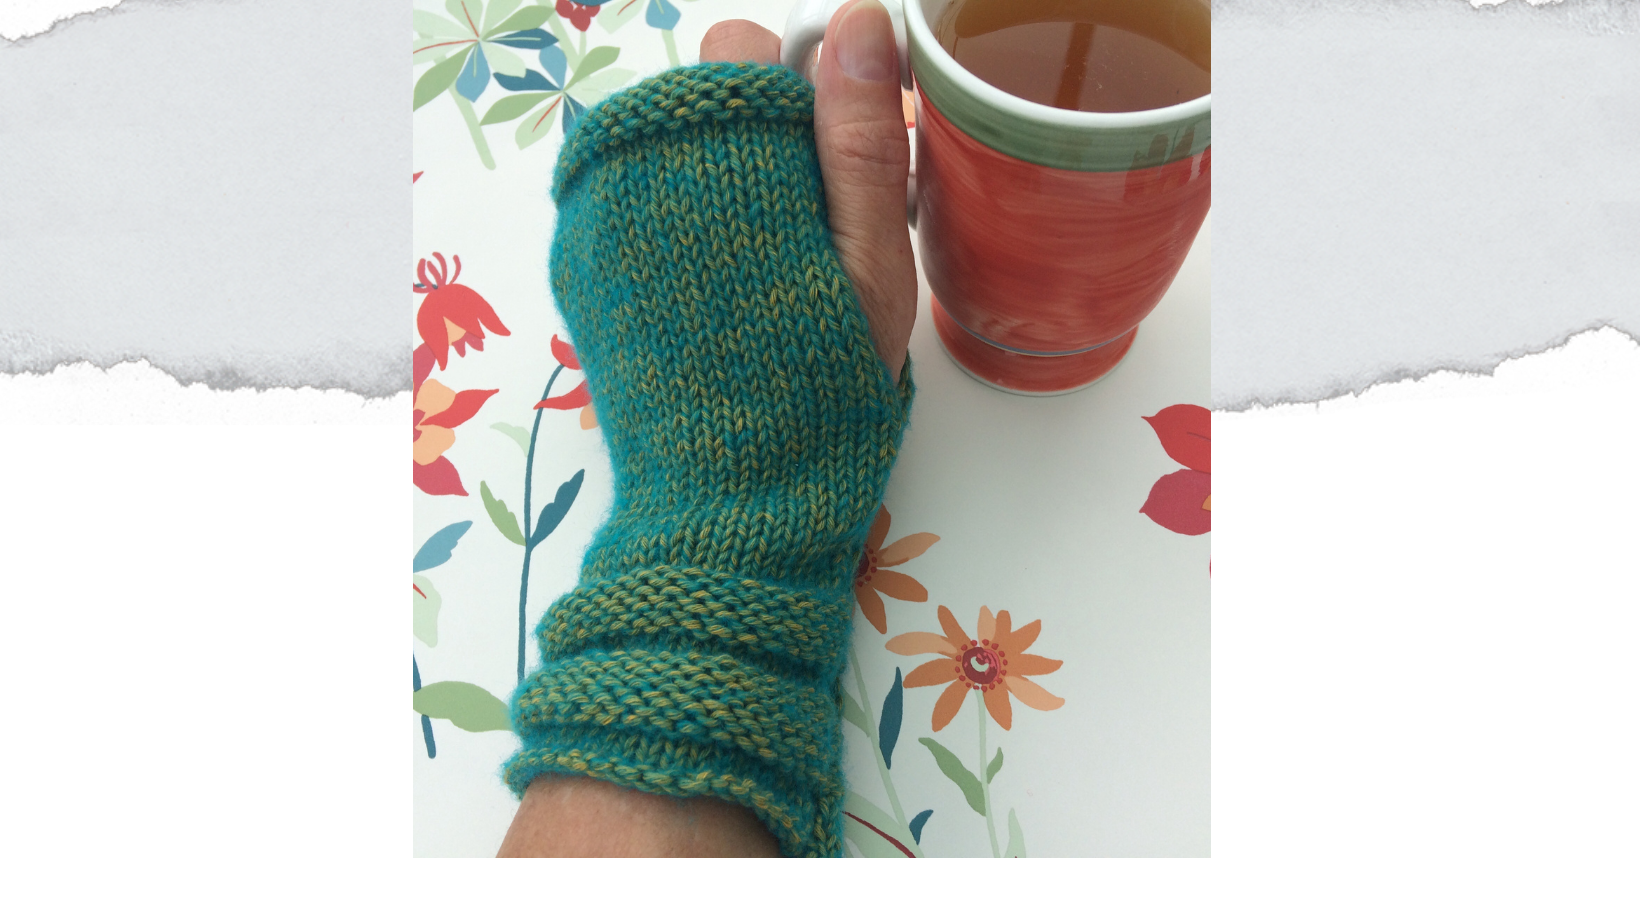 knitted mittens using green yarn. Worn on hand holding a mug